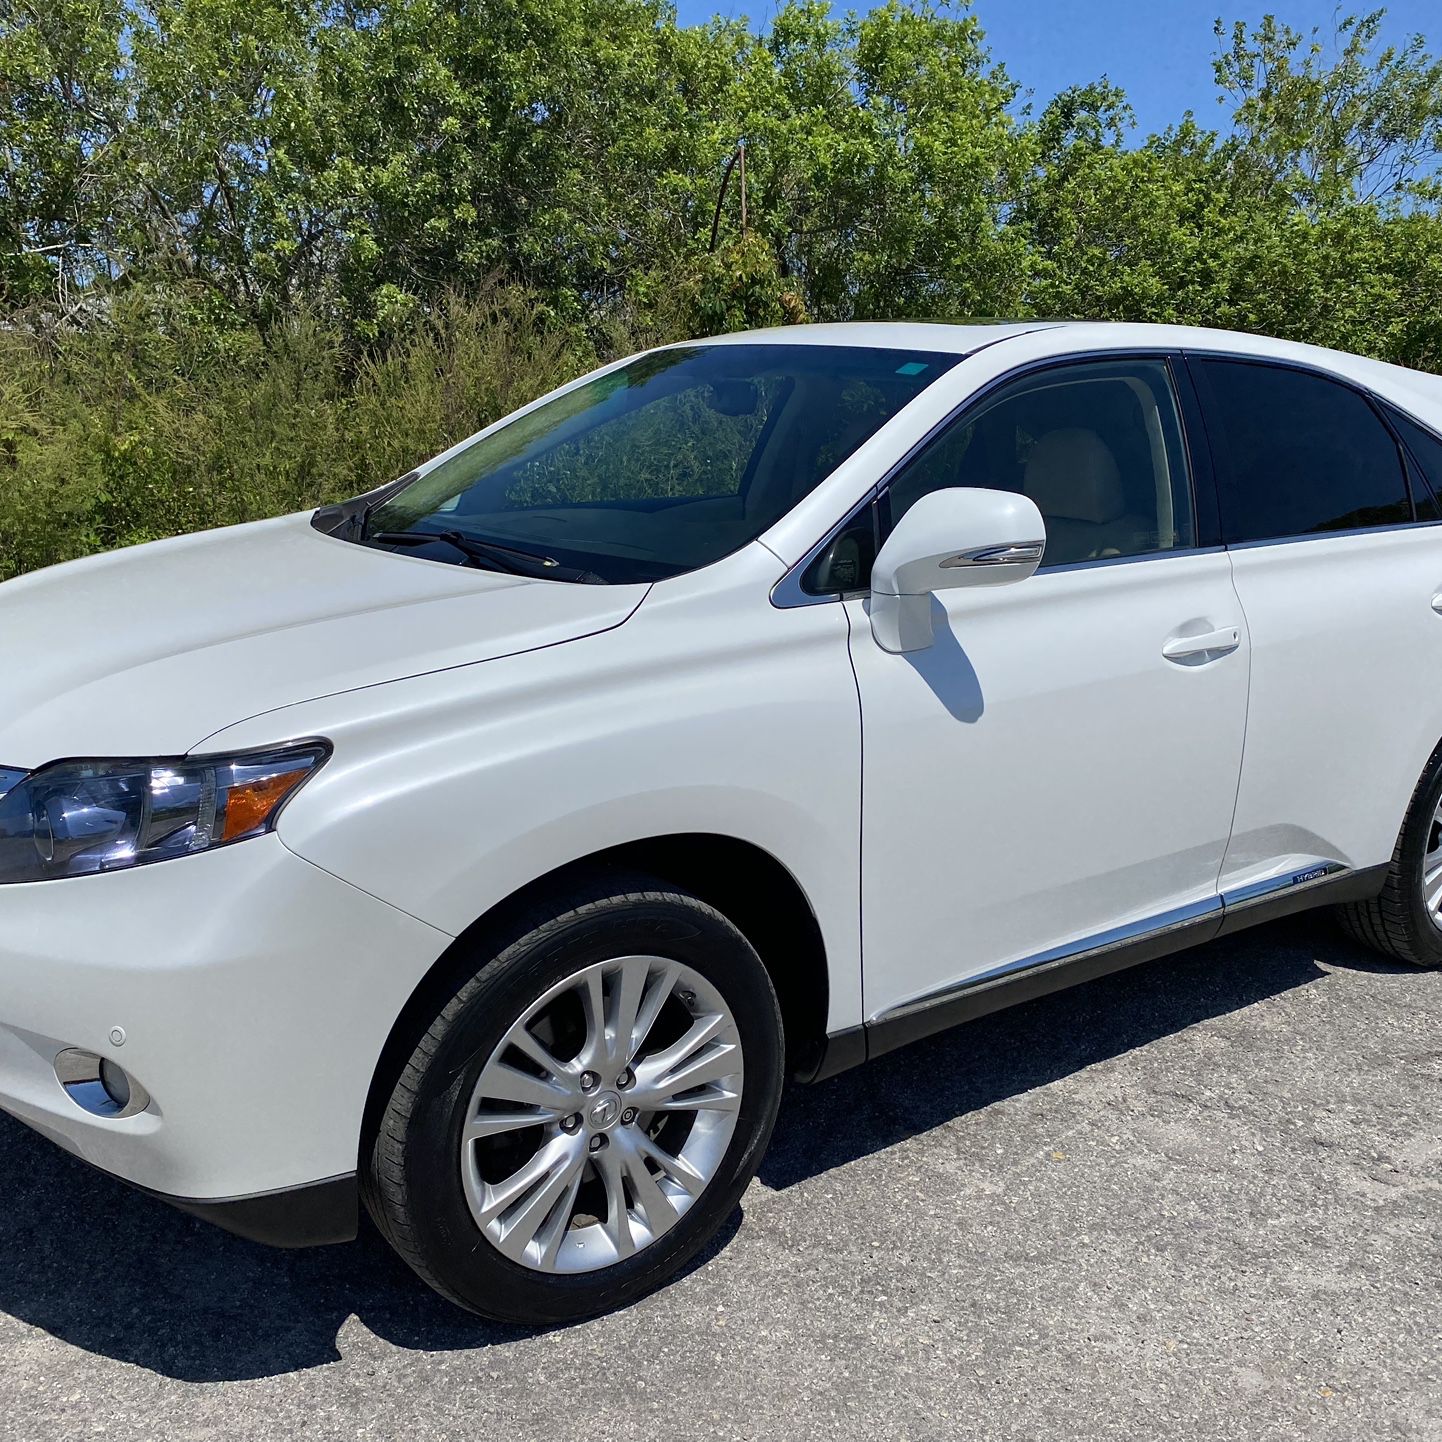 2010 LEXUS RX 450H HYRBID *ONLY 99,000 MILES 2 OWNER* CLEAN CARFAX FL  LIKE NEW CONDITION  *ONLY 99,000 MILES  LEXUS DEALER SERVICED SINCE NEW  WARRAN